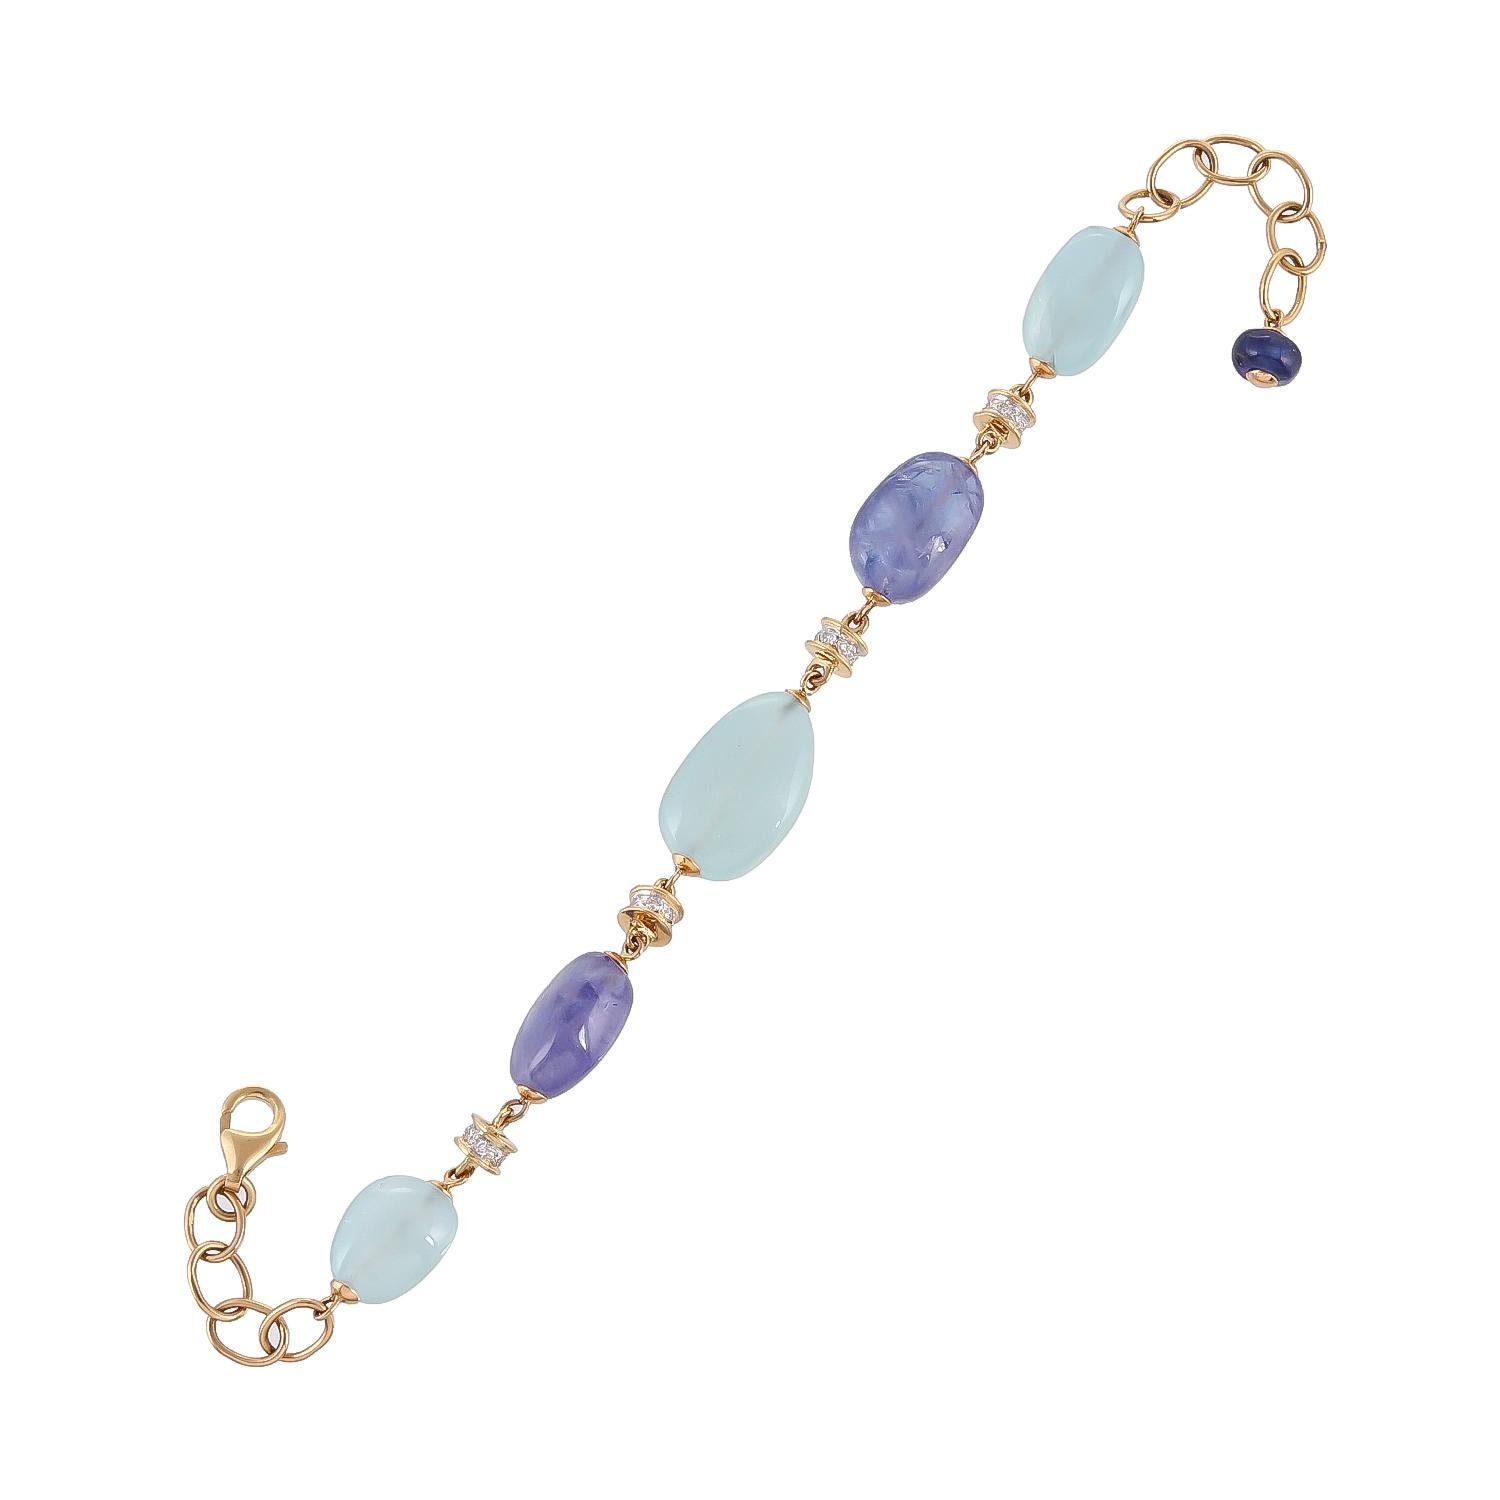 A stunning combination of 29.66-carat aquamarine and 23.31-carat tanzanite are enhanced with 0.32-carat diamond roundels and links further add to the gorgeousness.
Length of the Bracelet- 8.30 inches 